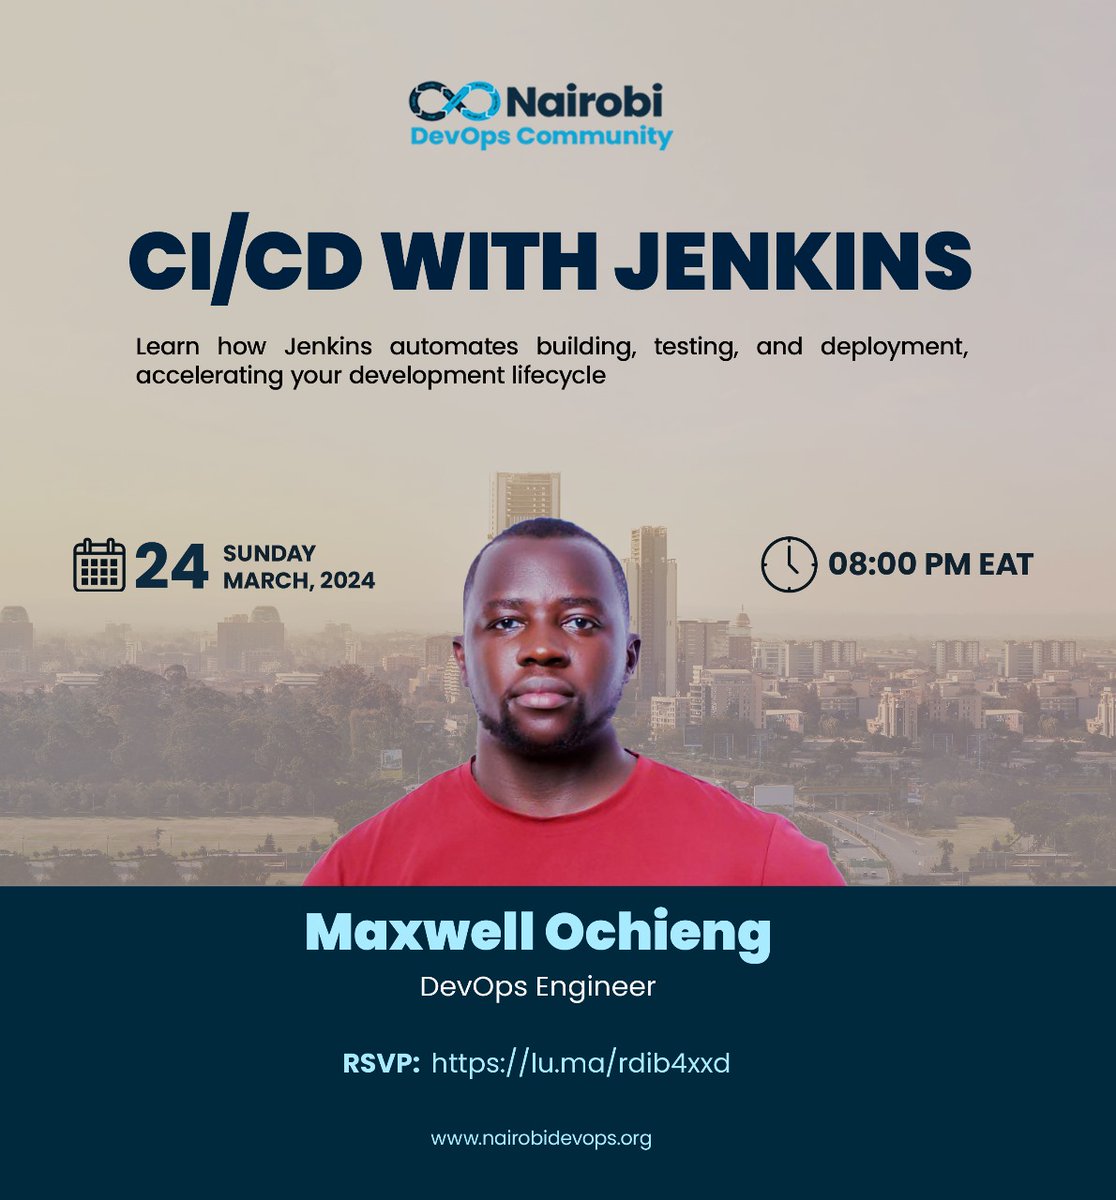 🚀 Don't Miss Out! CI/CD with Jenkins Event this Sunday! 🛠️ Learn how Jenkins revolutionizes your development process, making it faster and more efficient. RSVP now to secure your spot! 📅 Date: 24th March 2024 🕒 Time: 8:00 PM 📍 RSVP: lu.ma/rdib4xxd #CI #CD #Jenkins